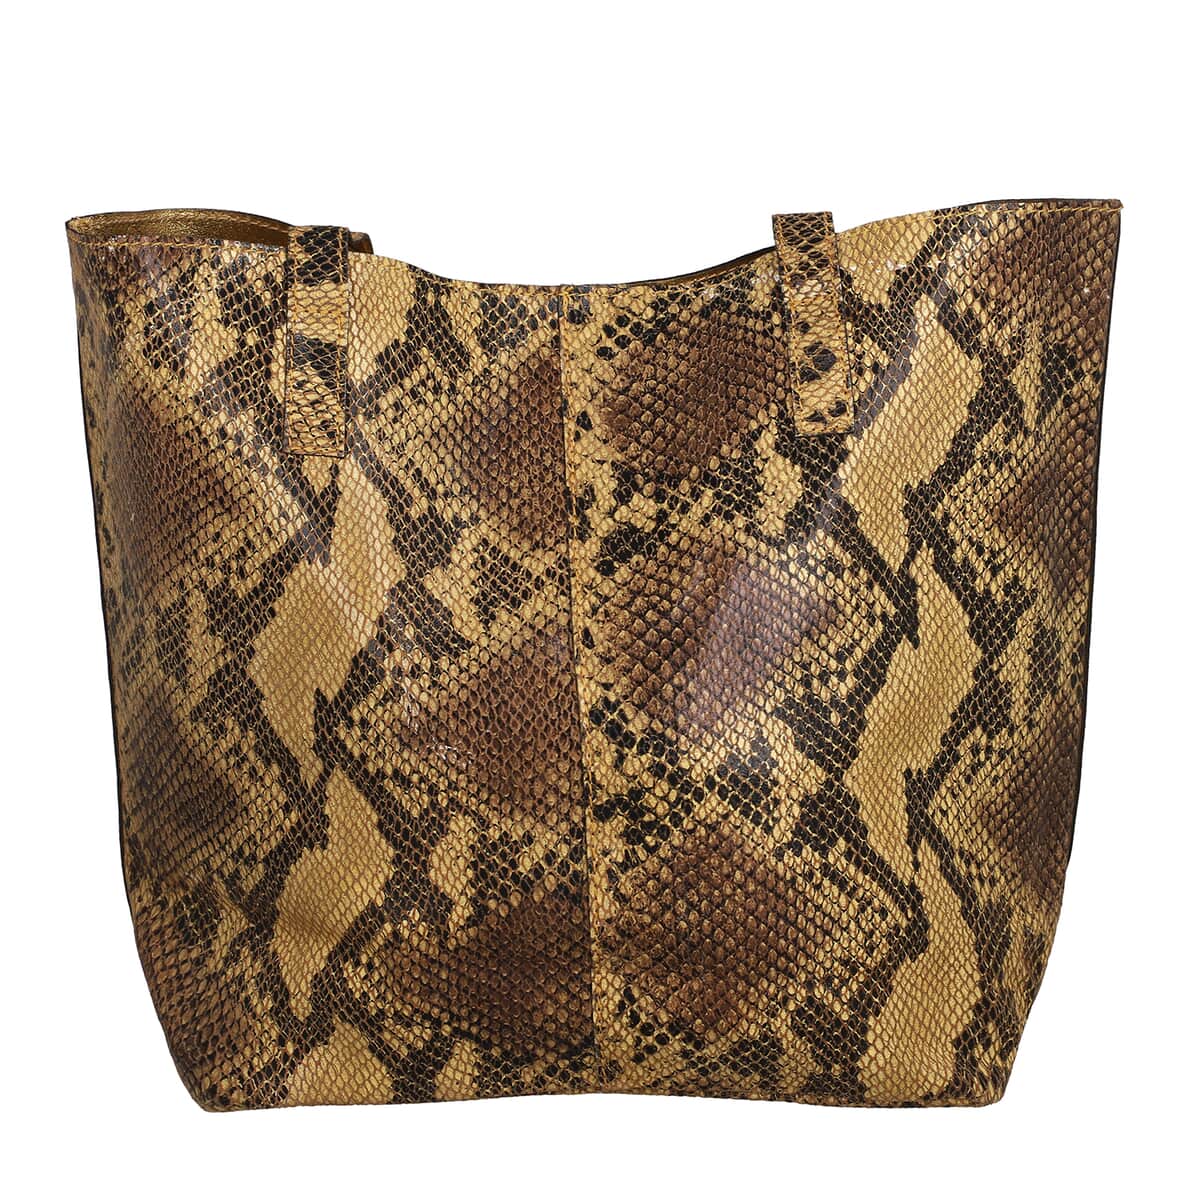 Black and Yellow Snake Foil Print 100% Genuine Leather Tote Bag (14.56"x 3.74" x 8.66") image number 6